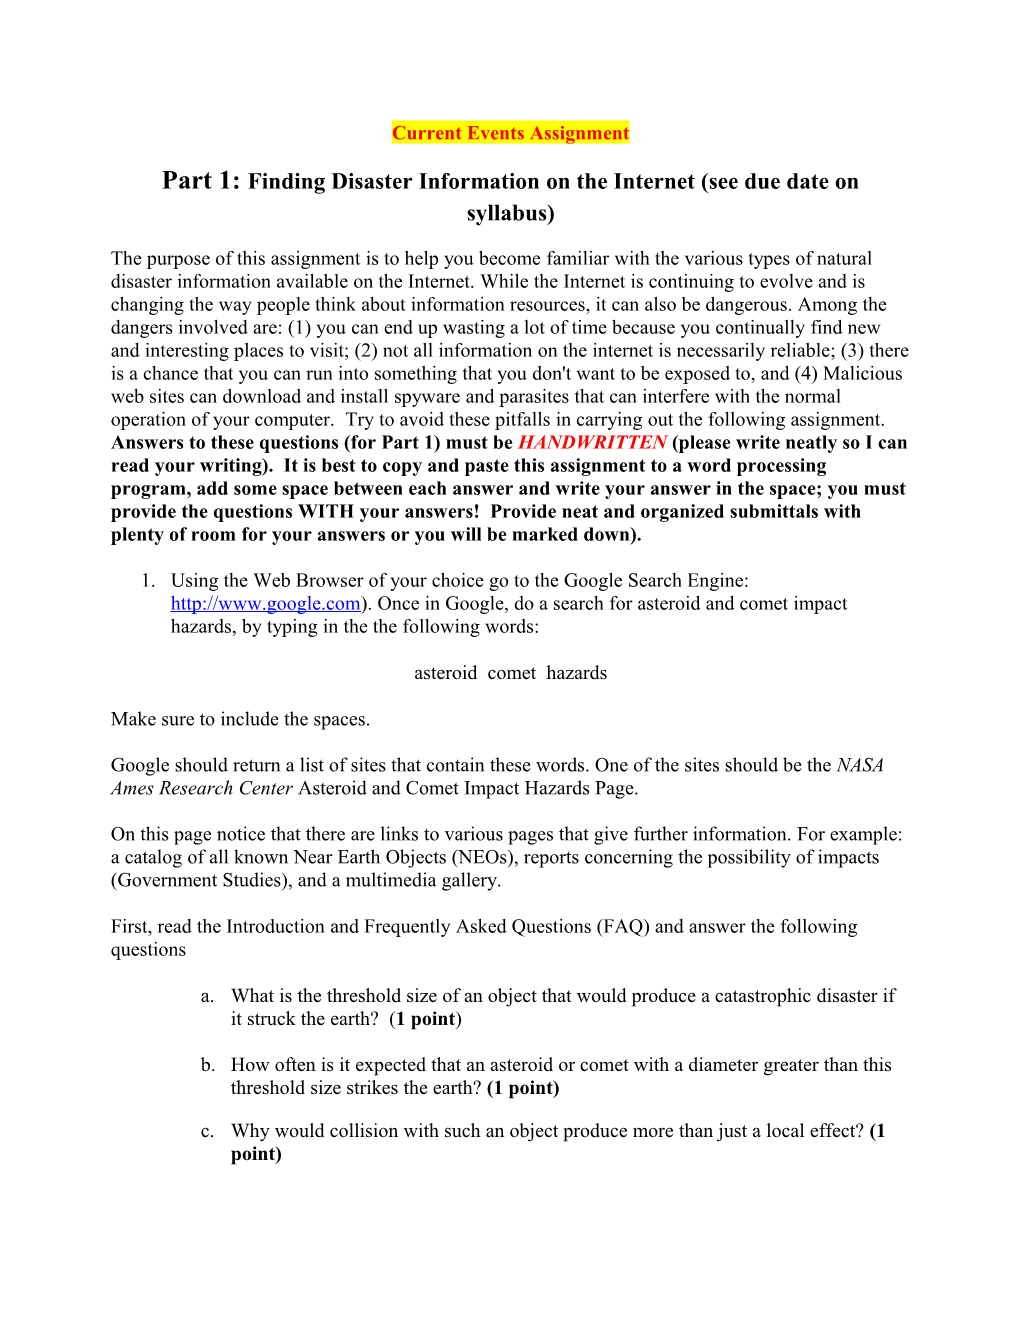 Part 1: Finding Disaster Information on the Internet (See Due Date on Syllabus)